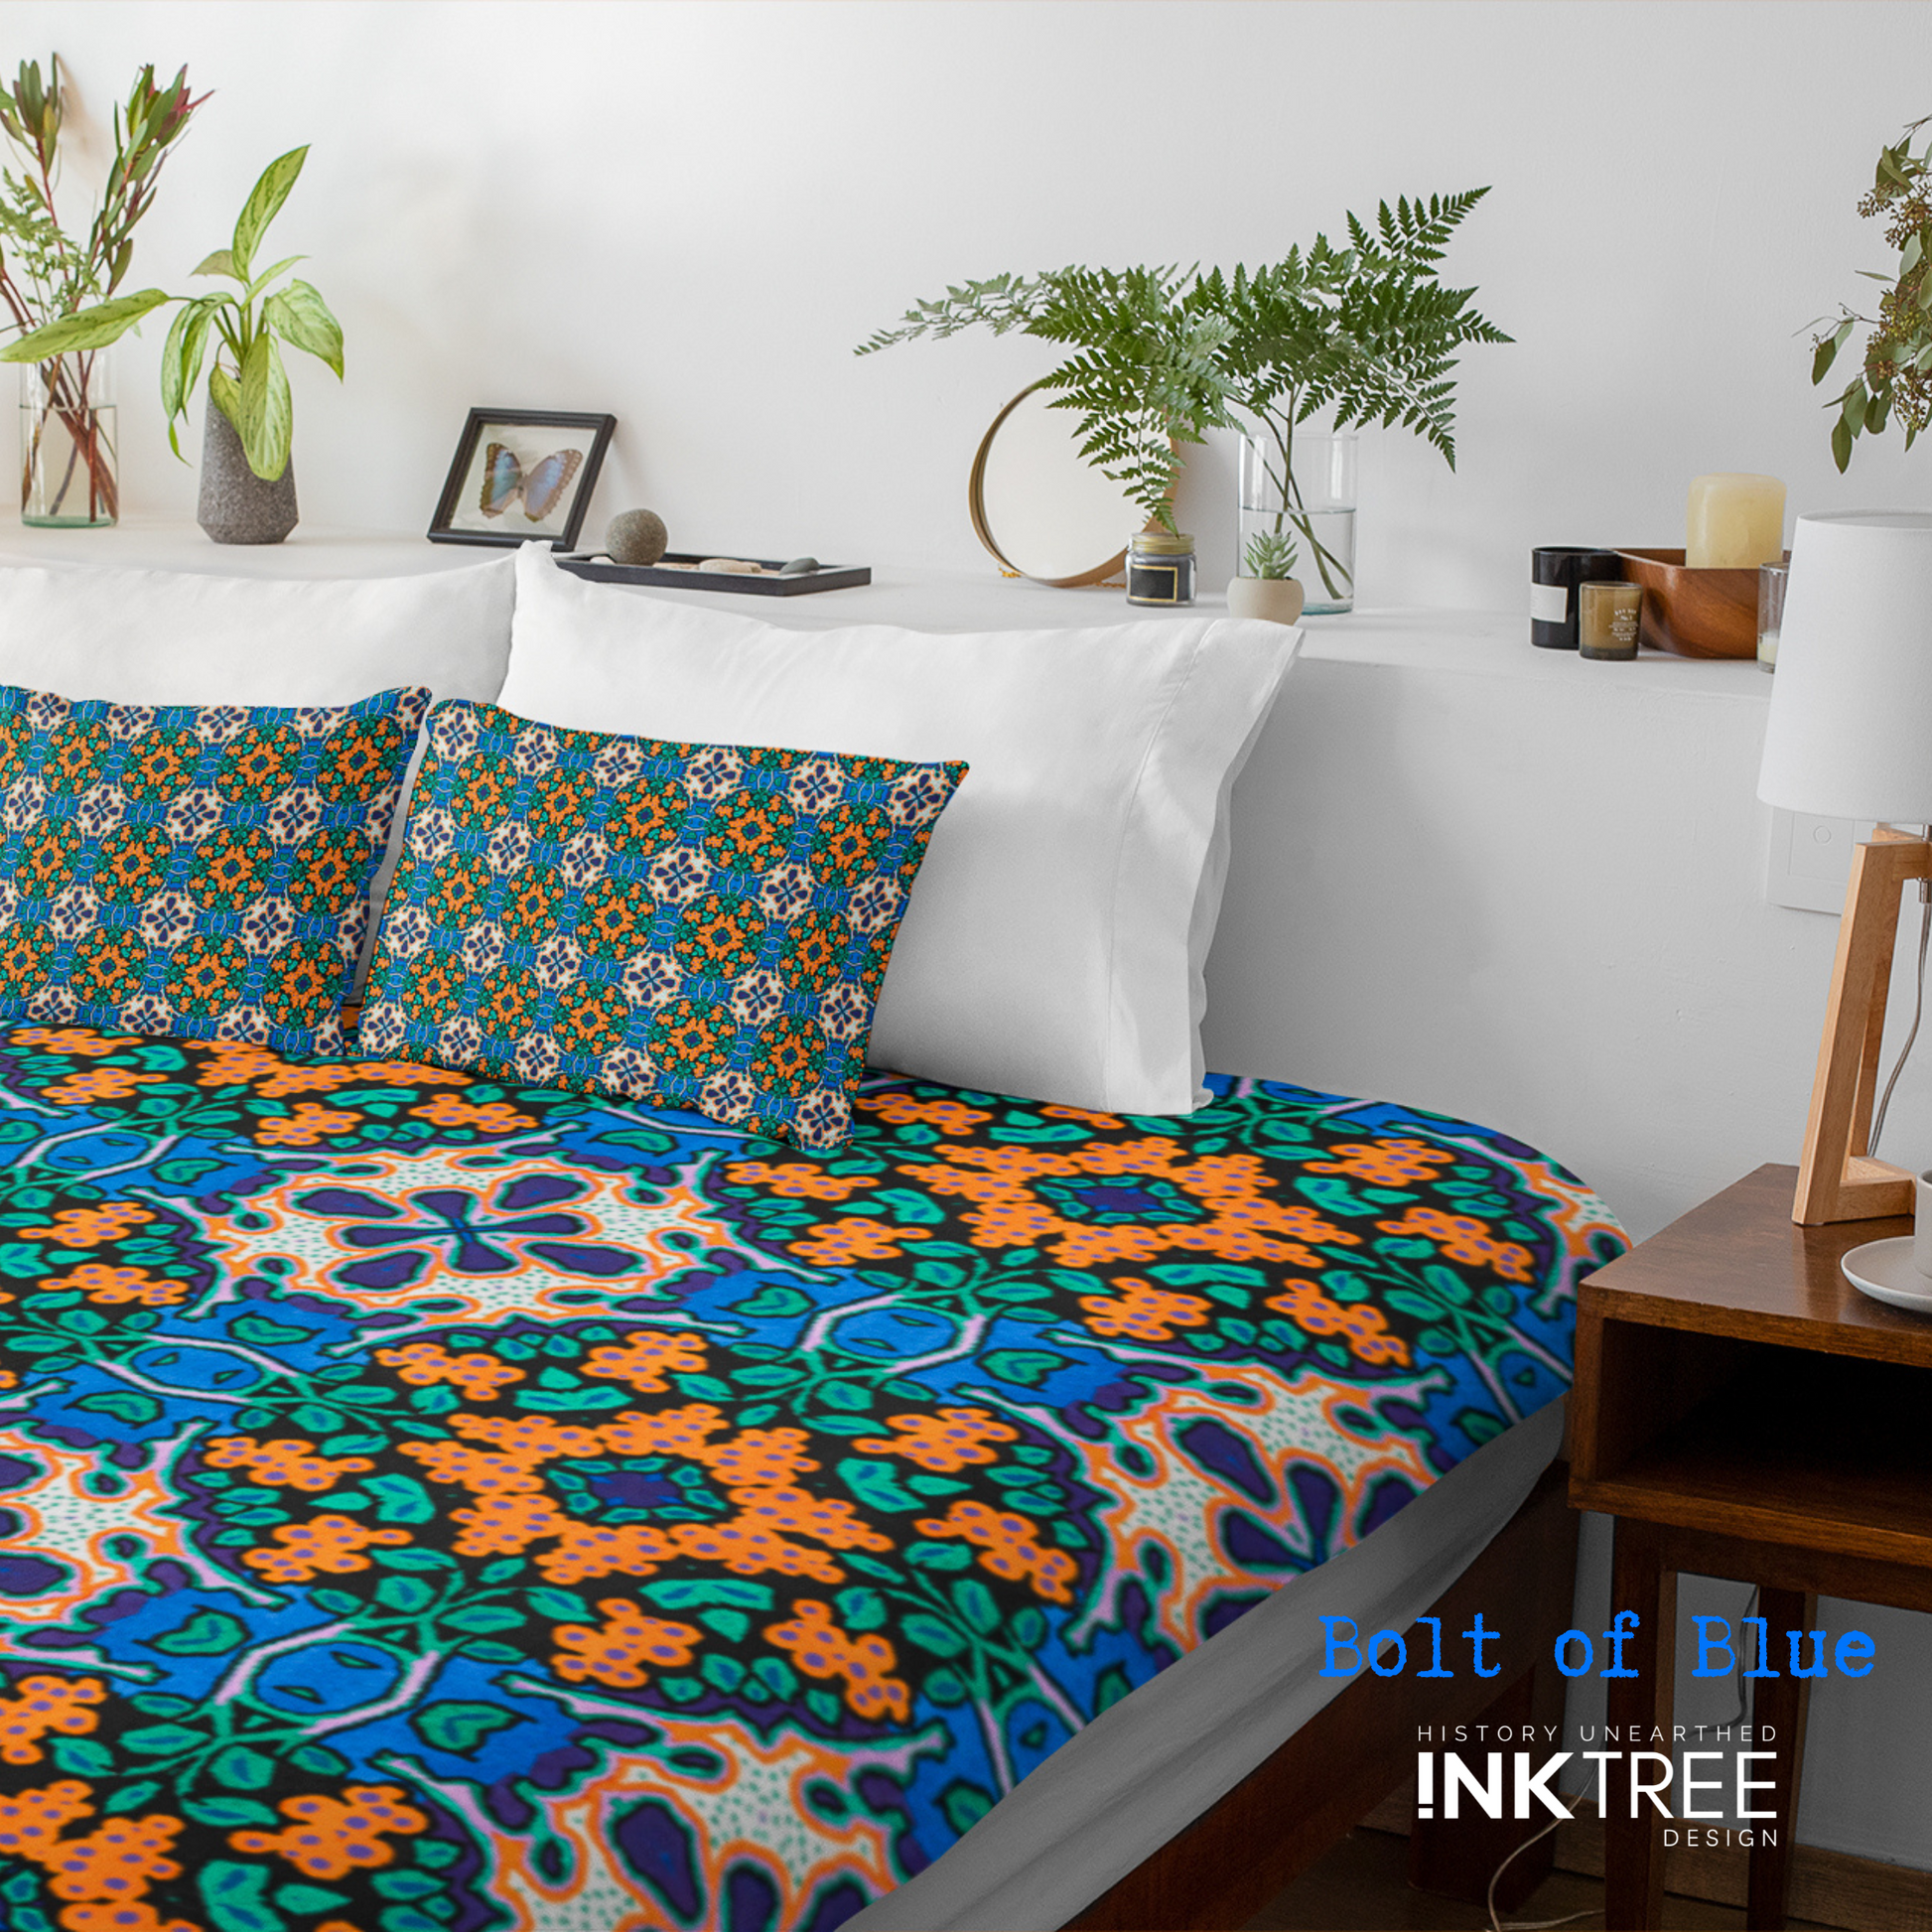 A doona cover and front pillows with an orange, white, black, blue and green pattern on a bed with a white wall, white pillows and white backboard background. There is a lamp with a white shade and wood base and plants and a small round metal mirror on the back board. There is also a bolt of blue, history unearthed ink tree design logo in the bottom right hand corner on it.